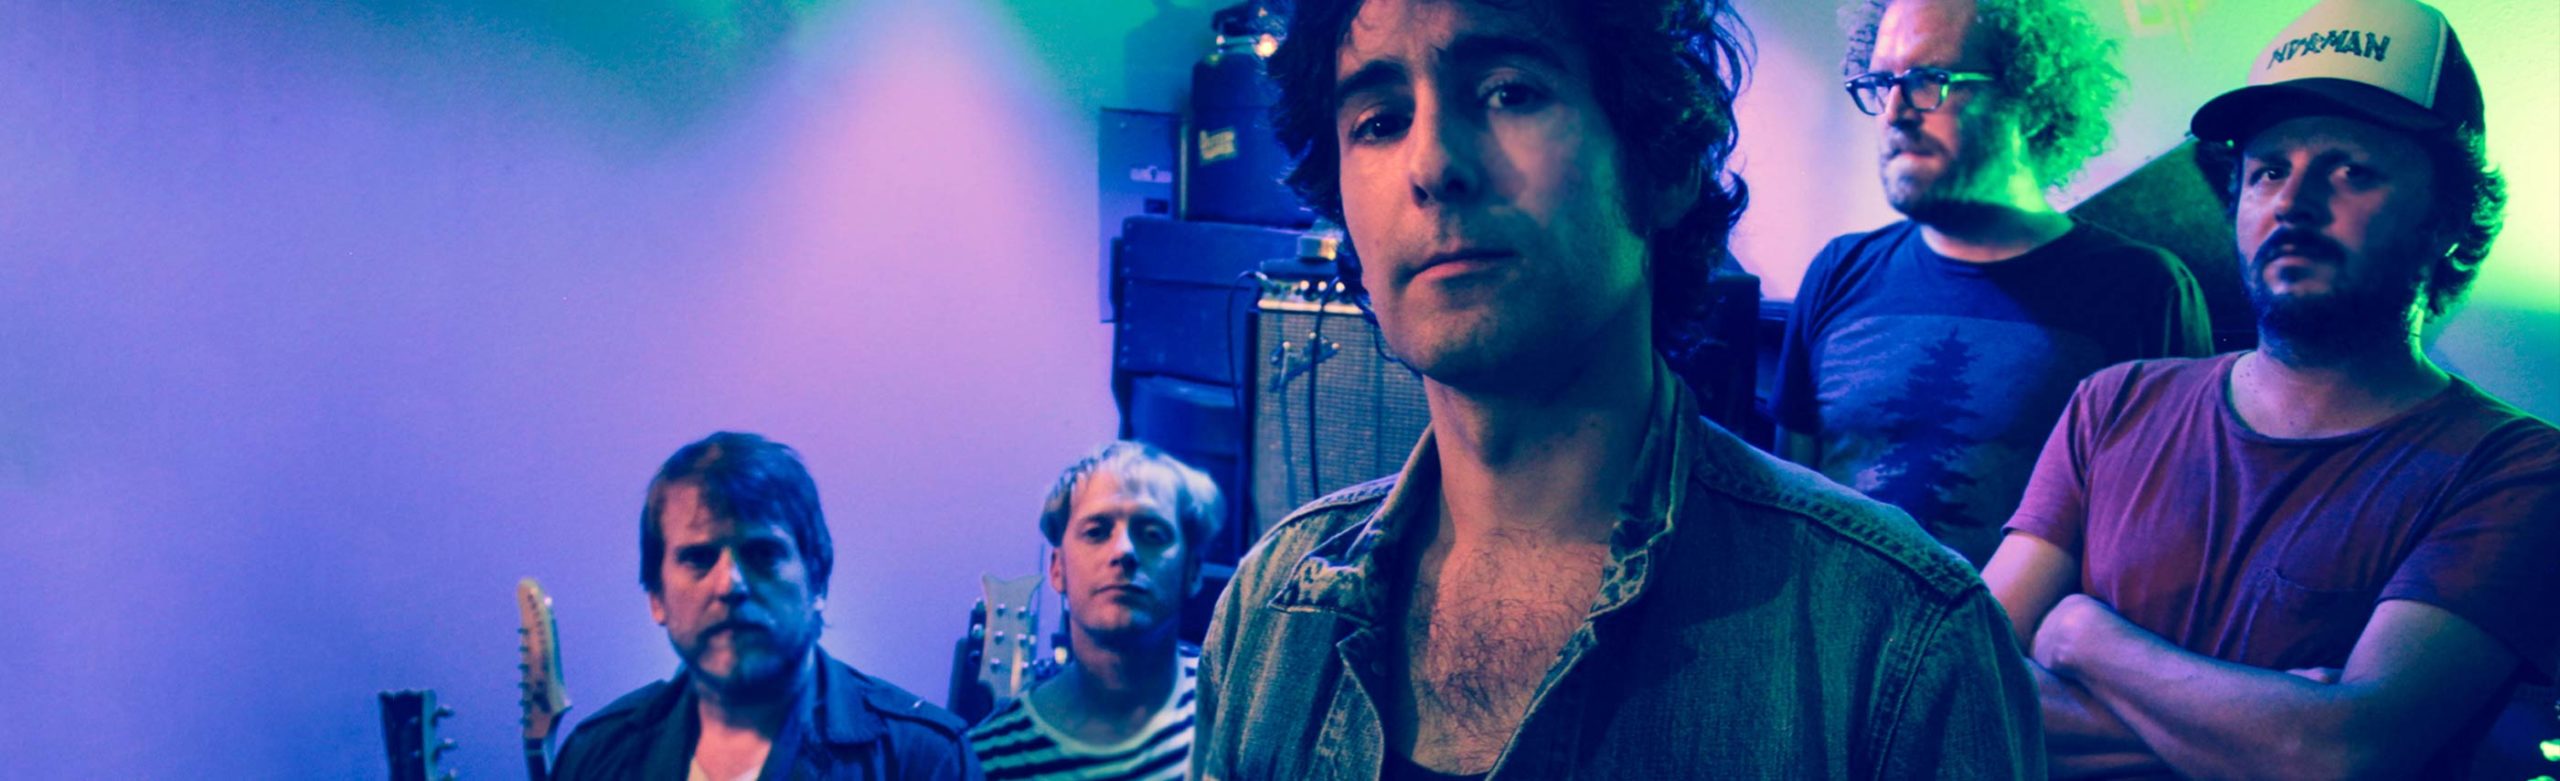 JUST ANNOUNCED: Experimental Country Rockers Blitzen Trapper Will Return to Missoula Image